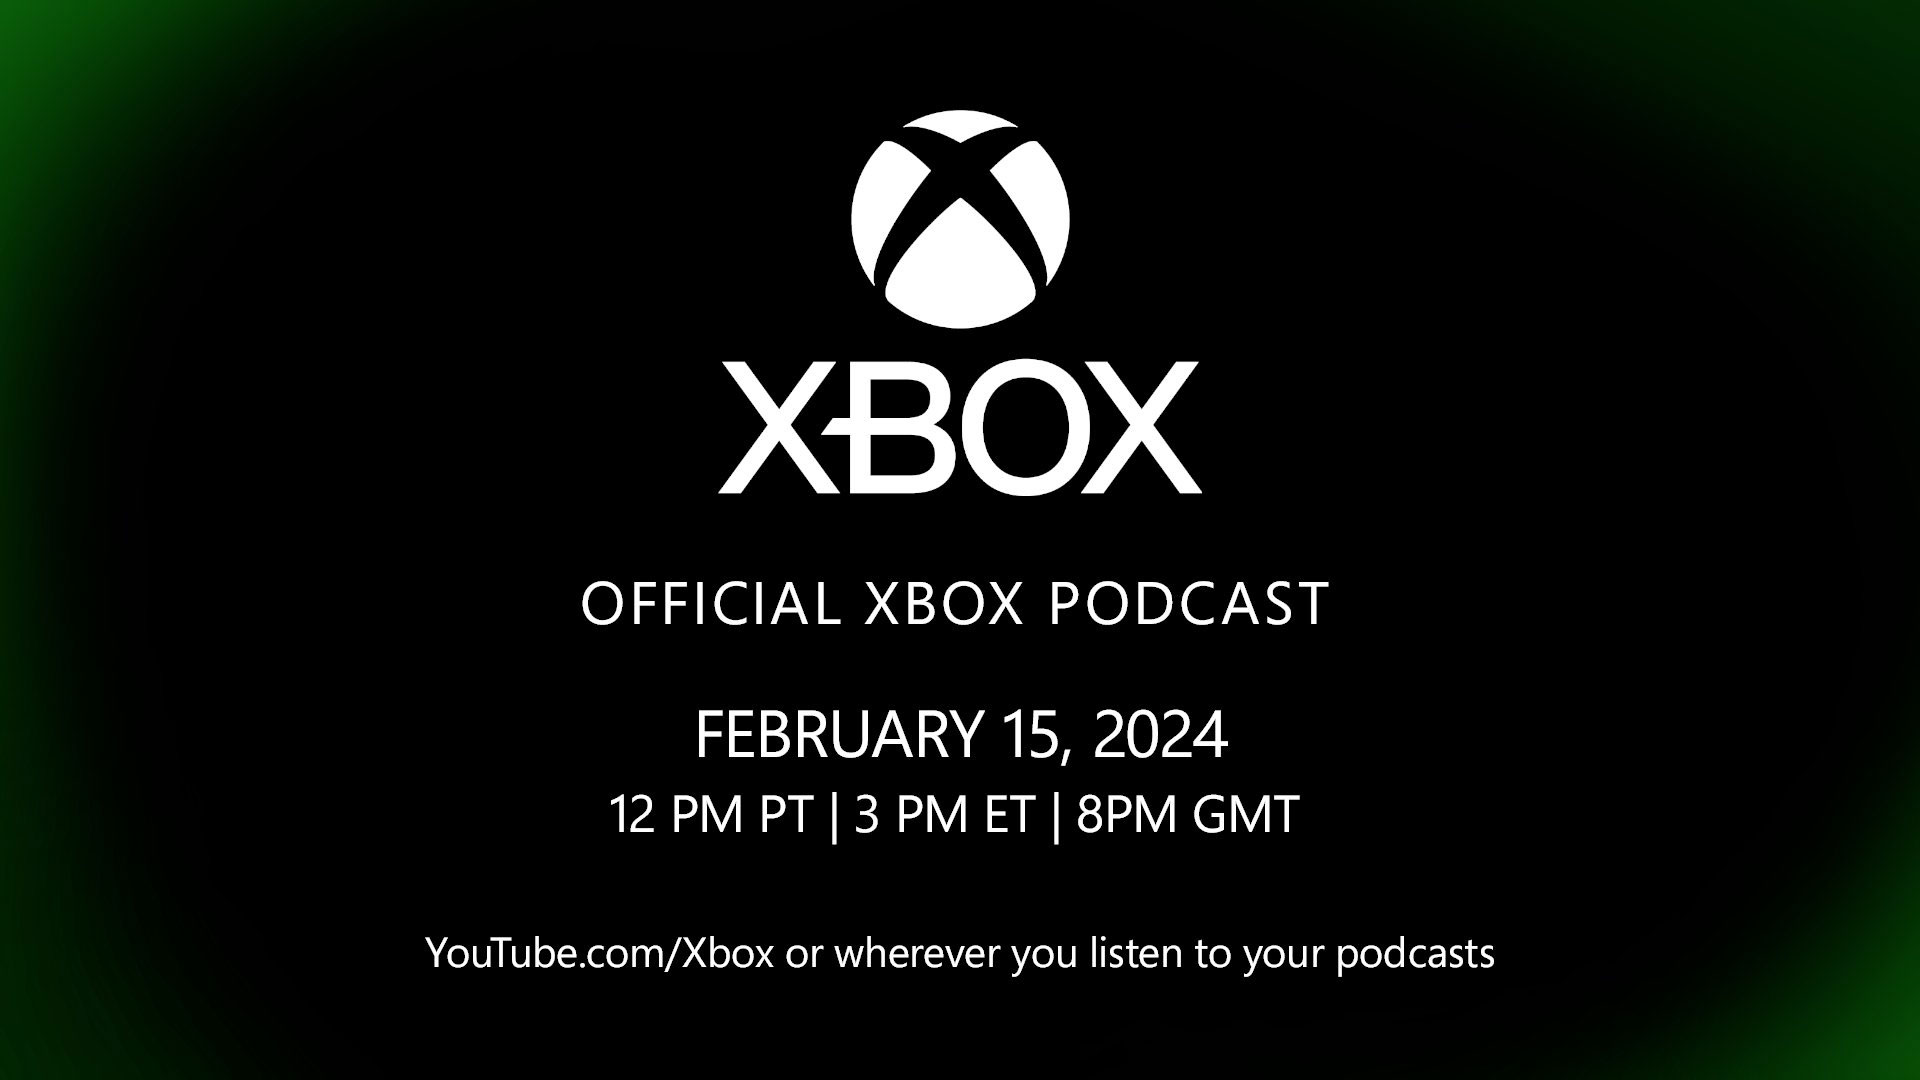 An official Xbox podcast is happening on February 15 to share updates on the Xbox business